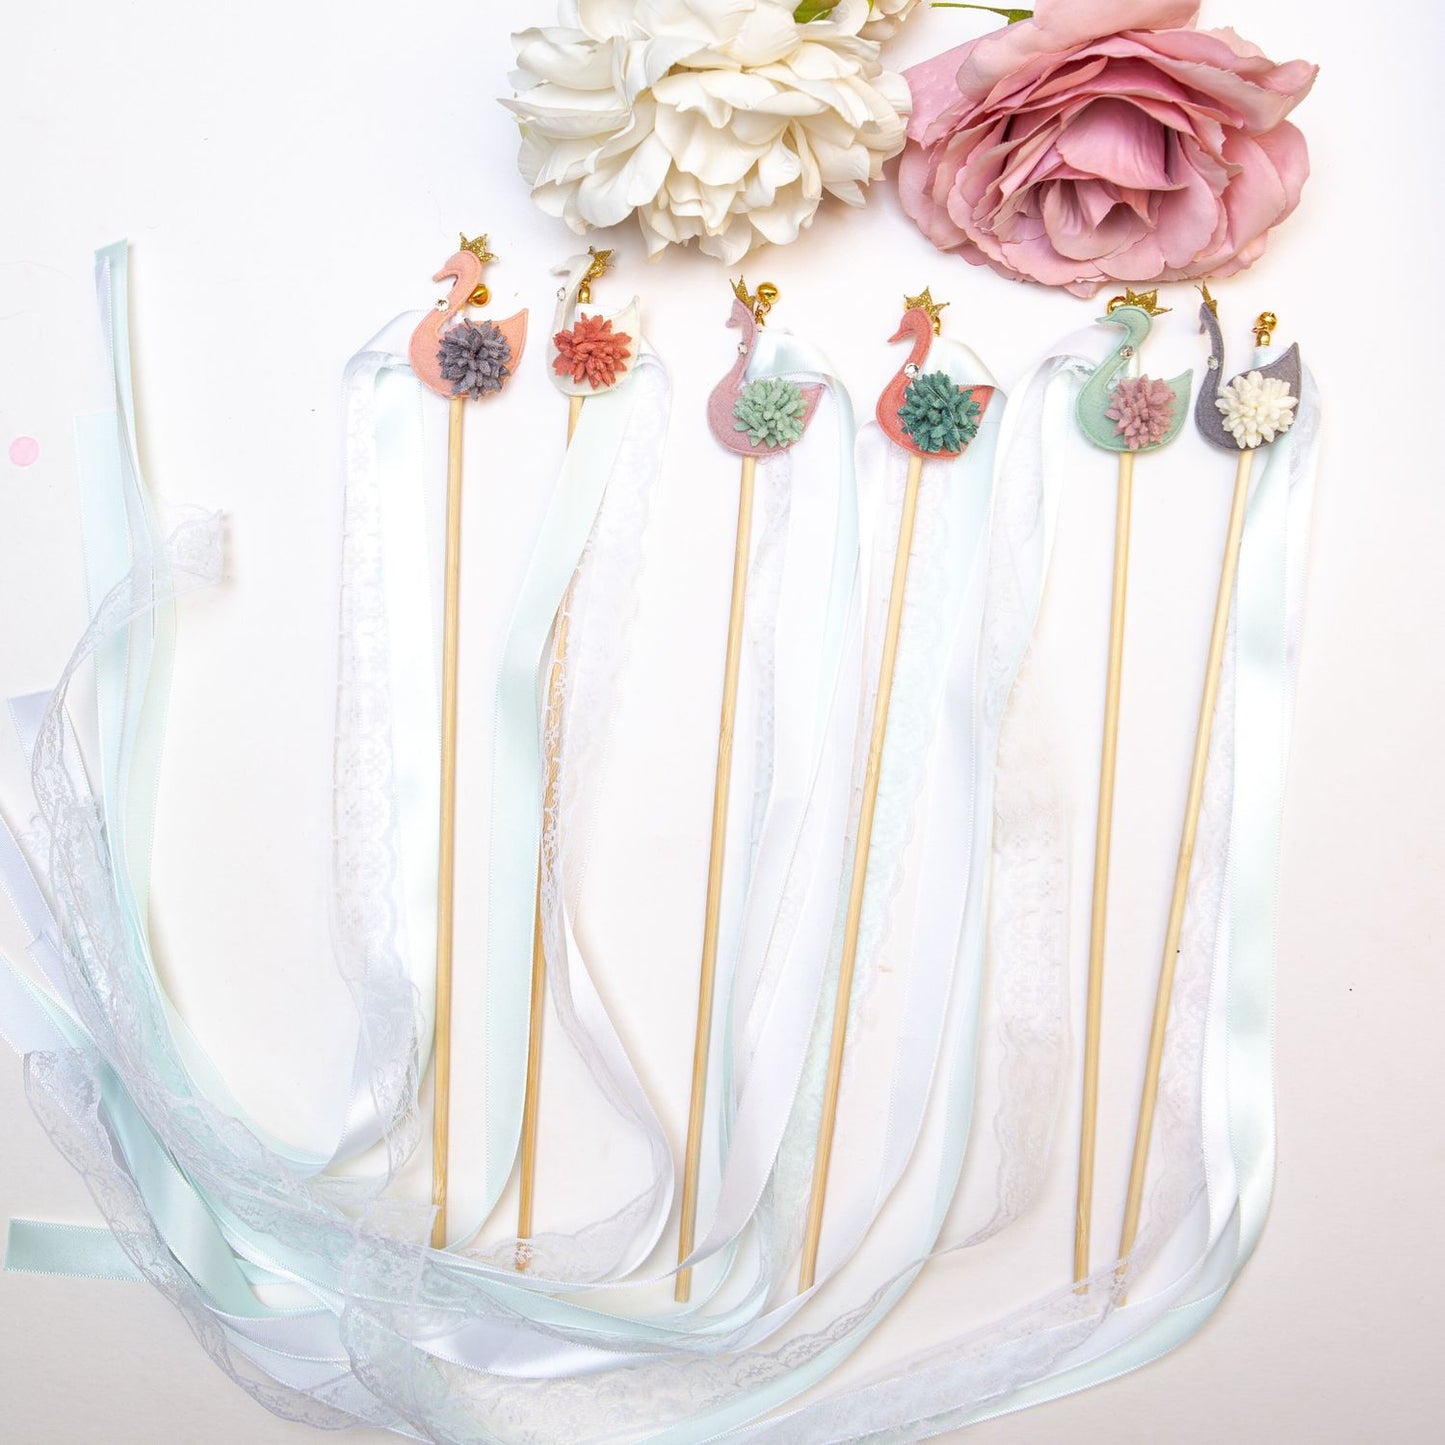 Lace Party Wands - Swan Princess Party